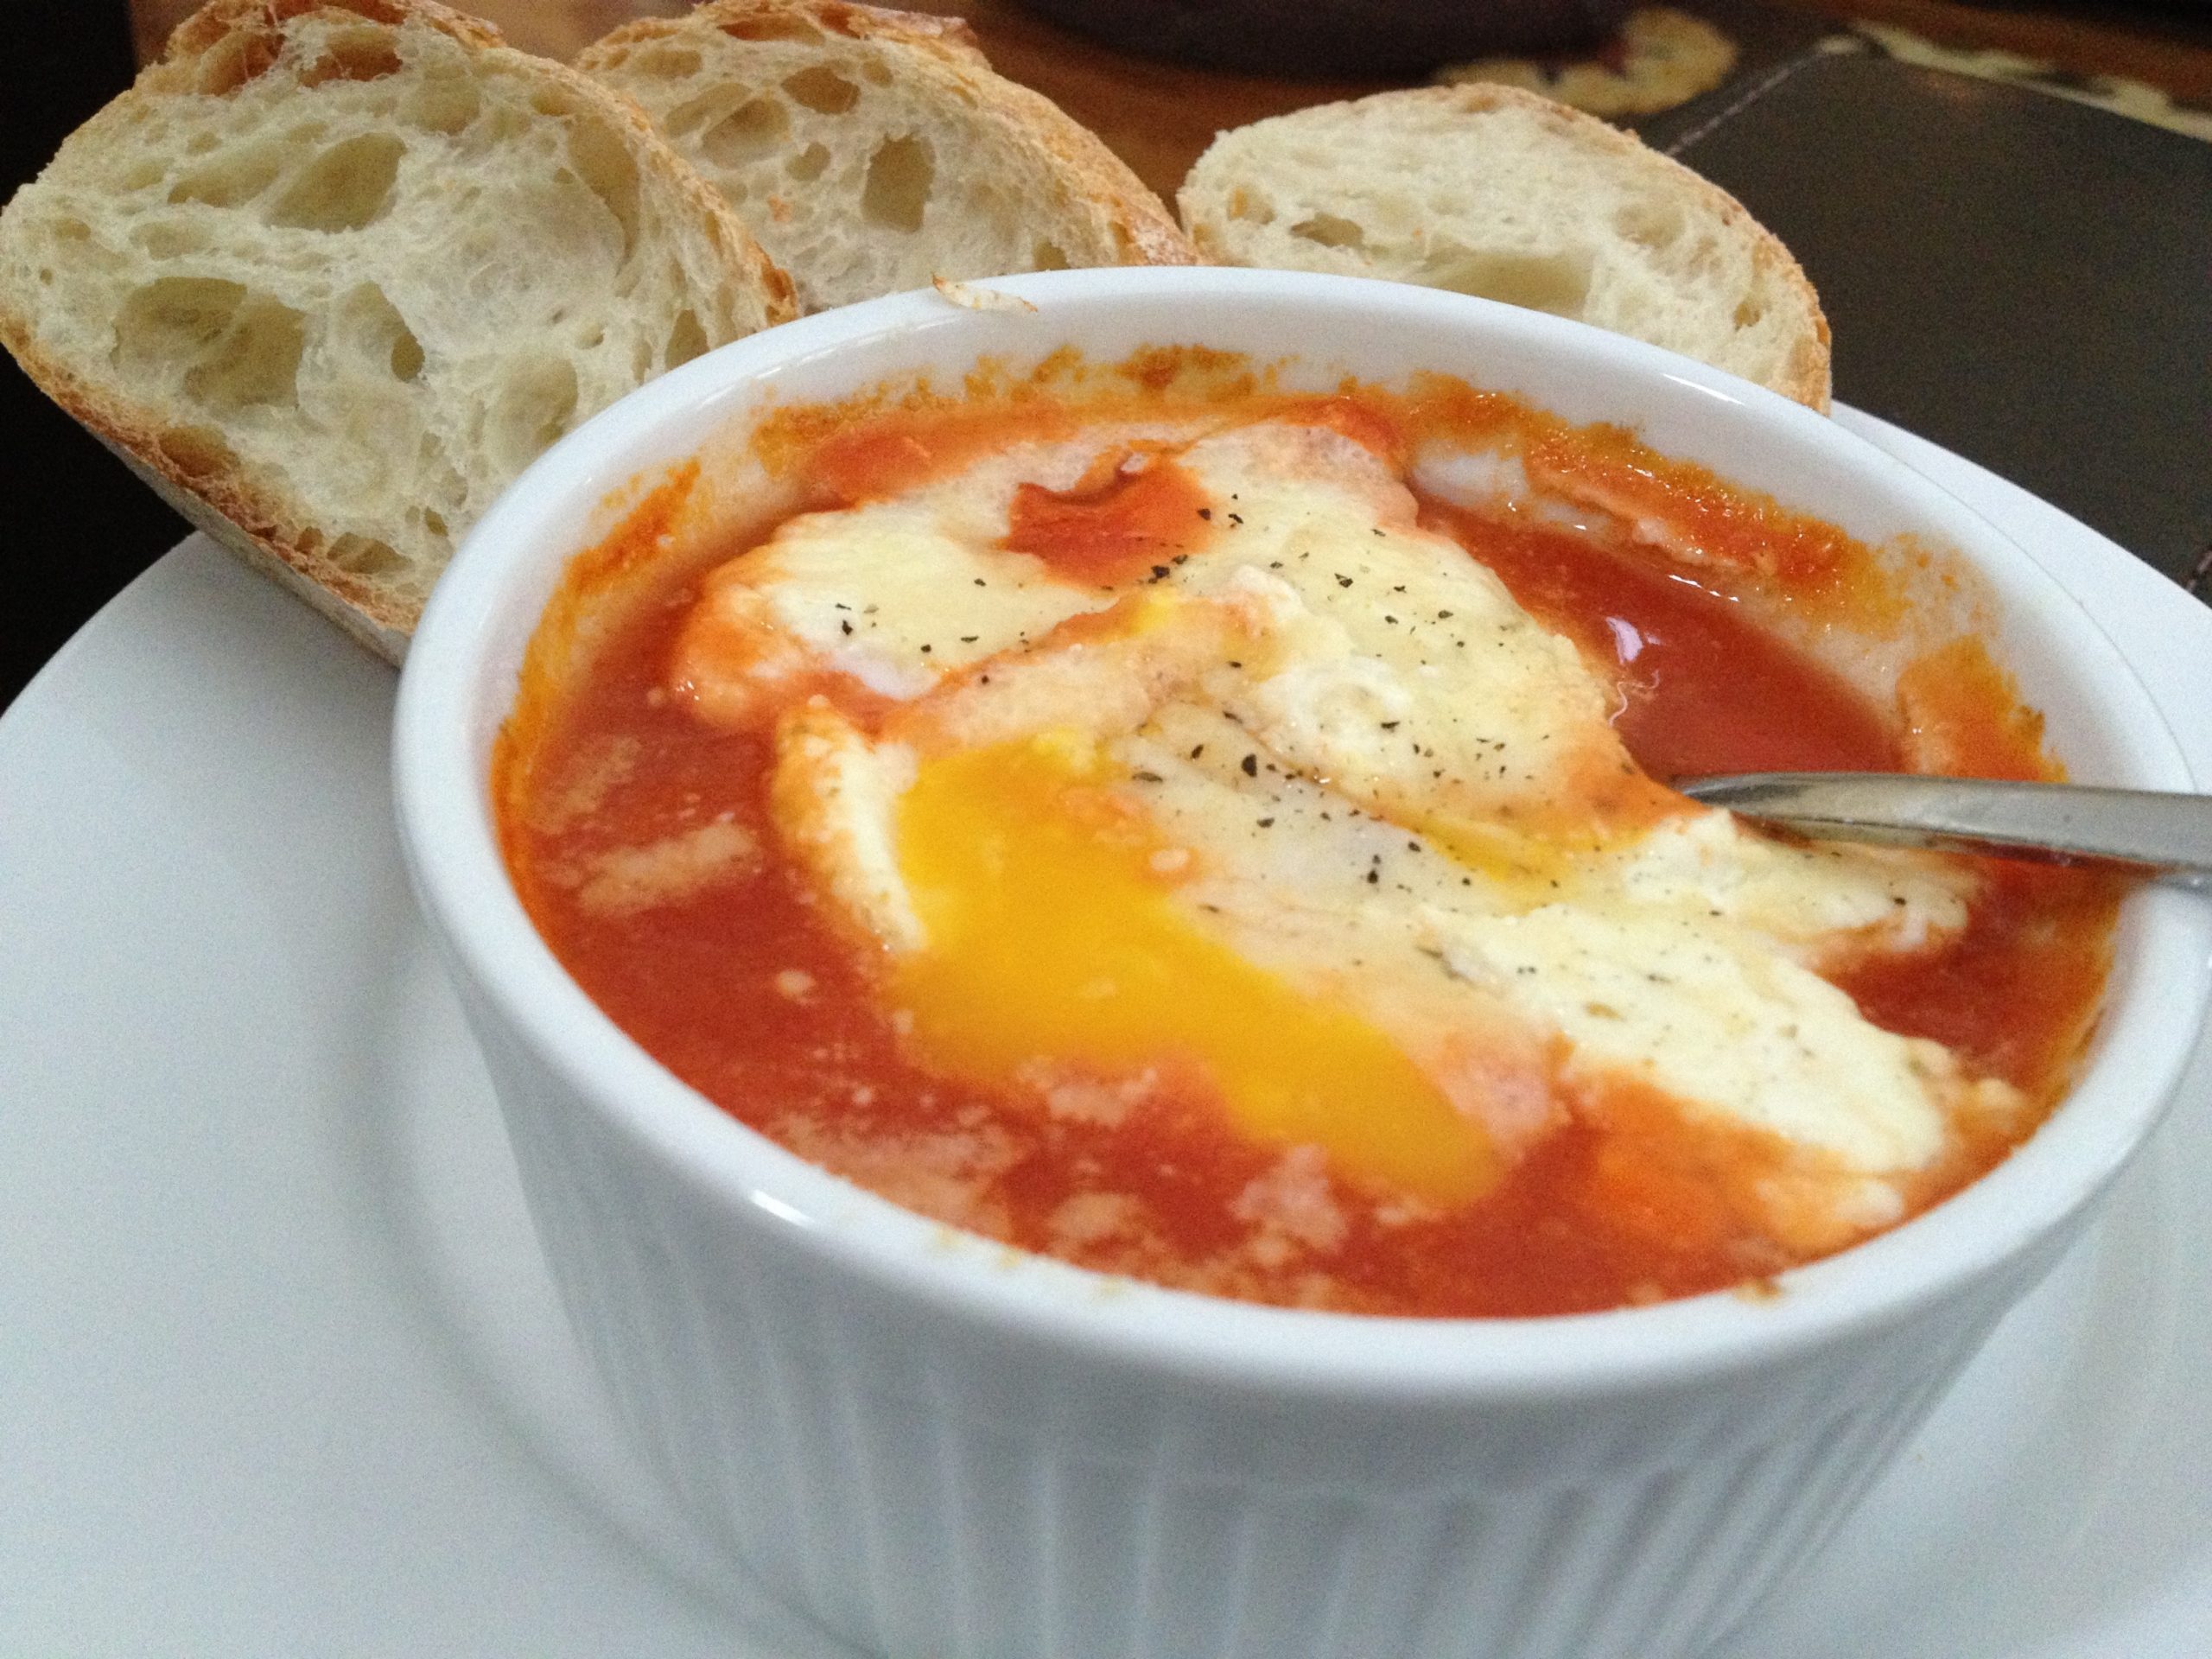 eggs baked in tomato sauce